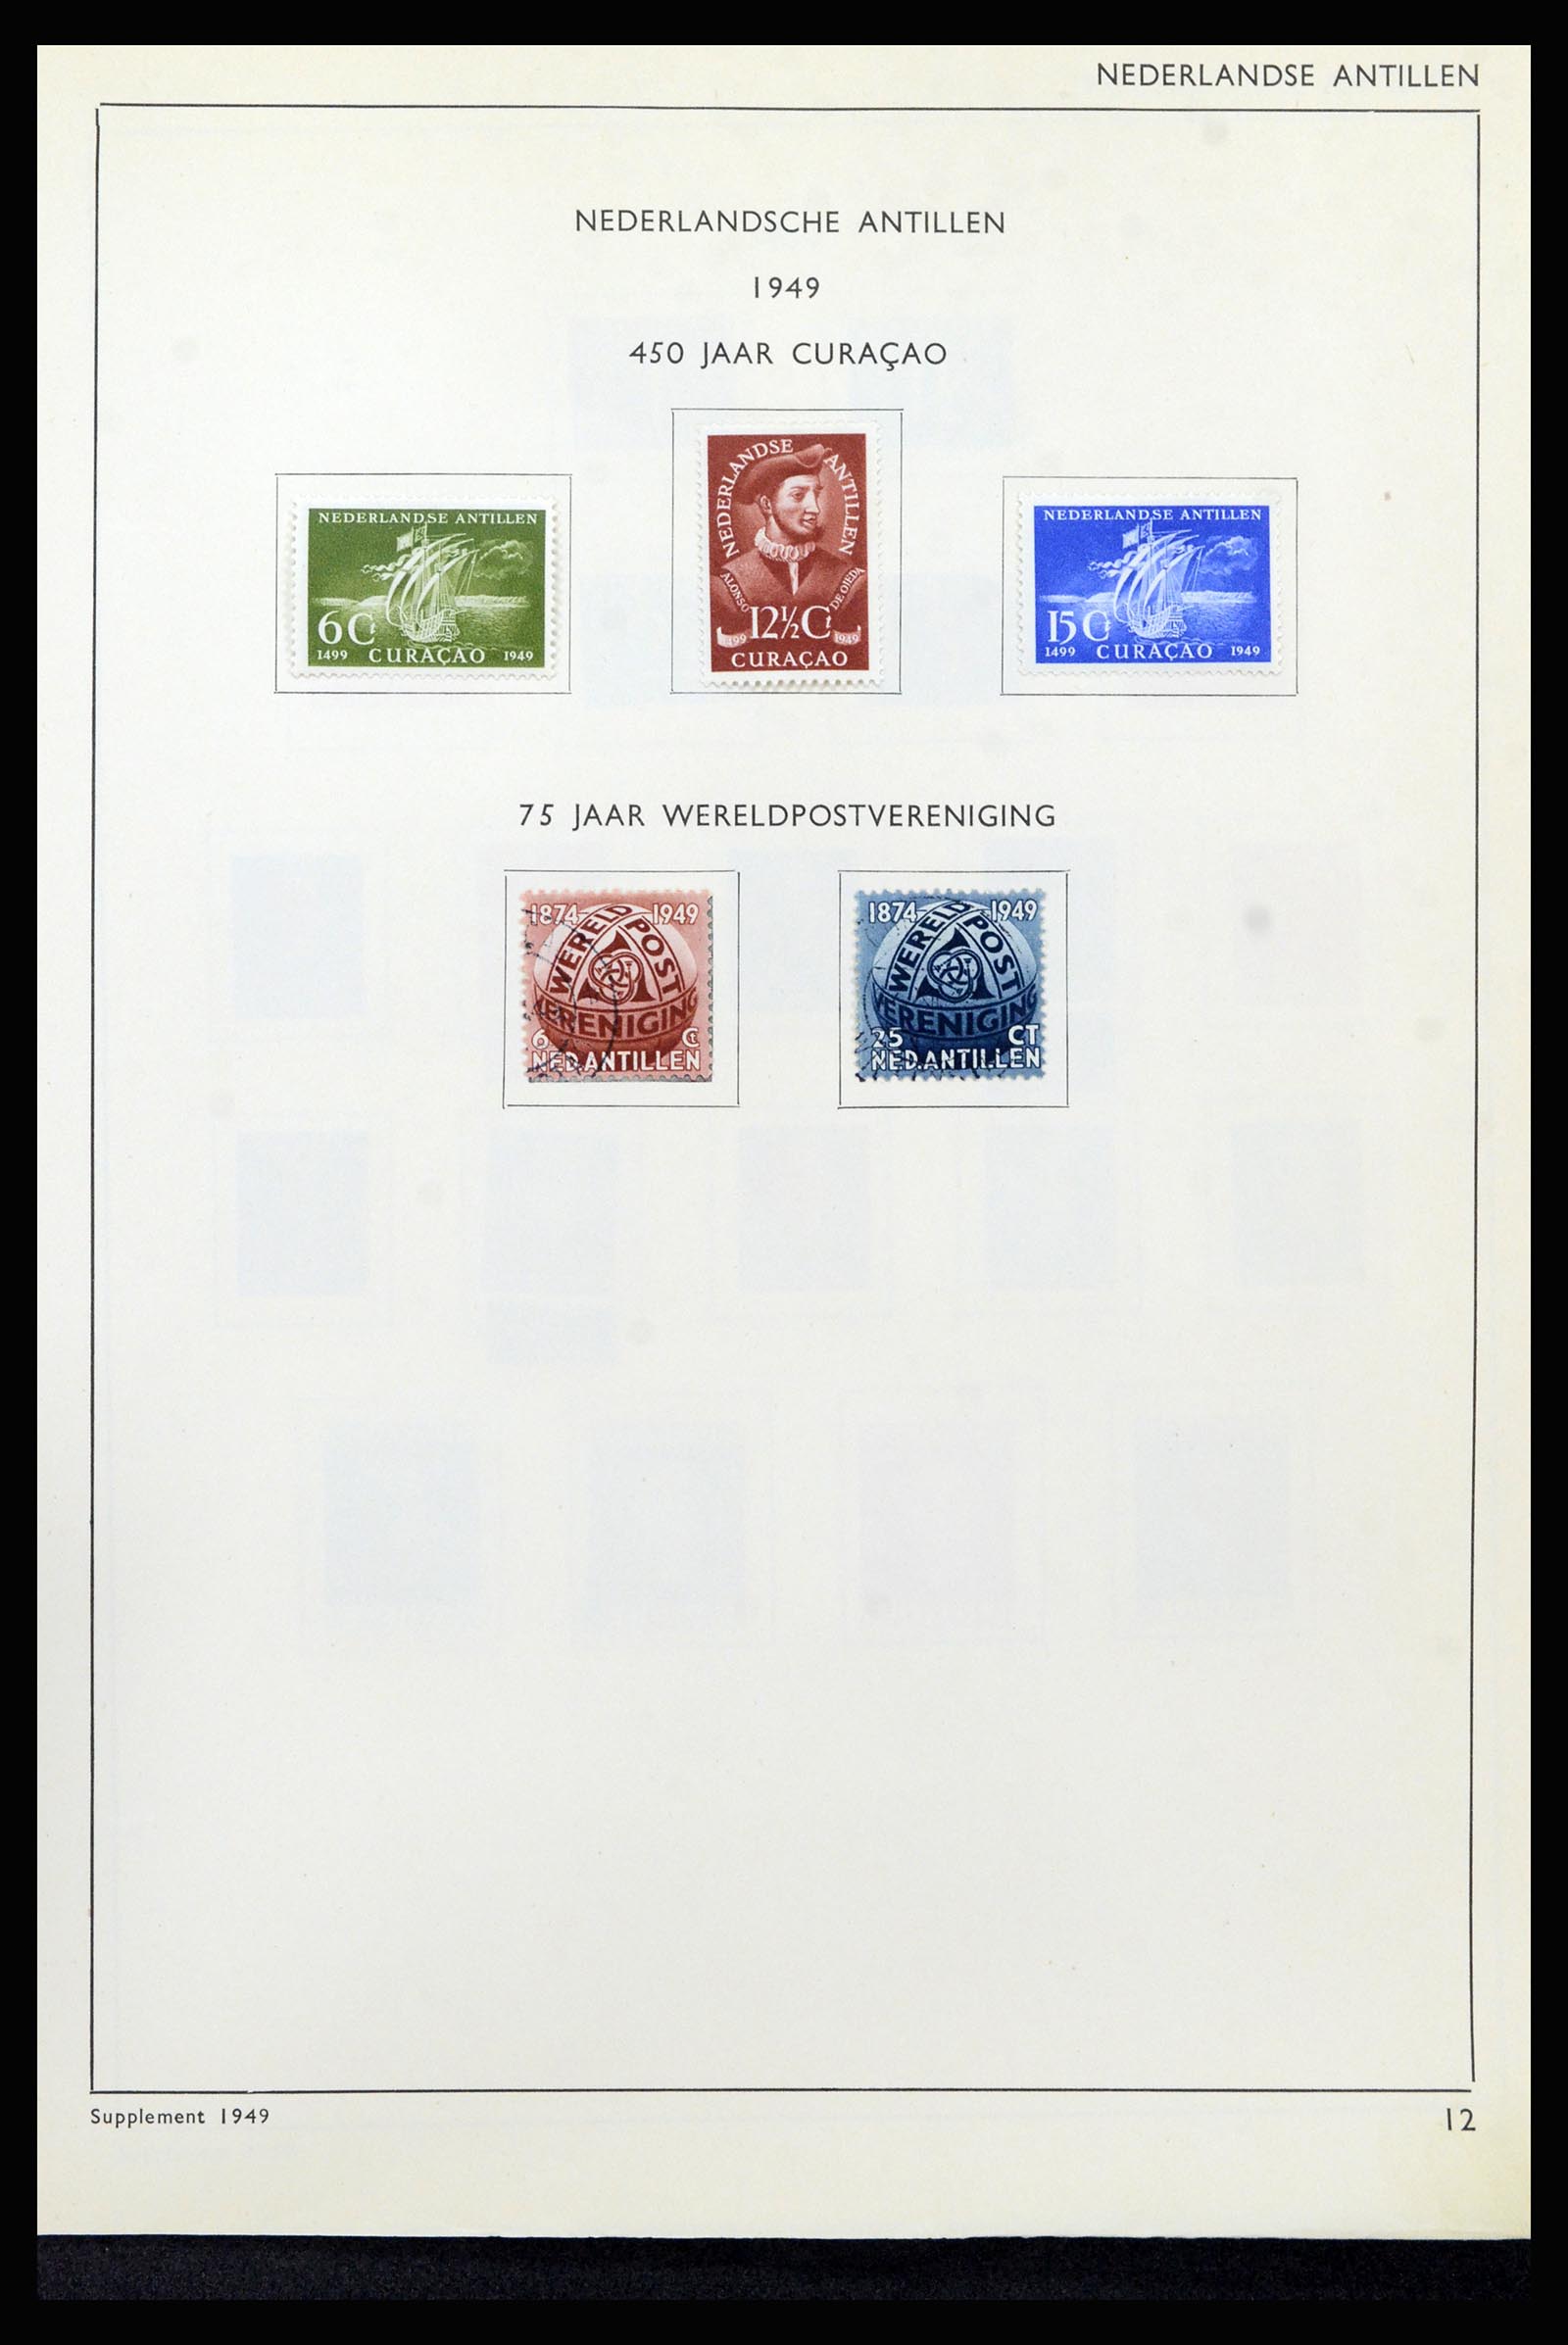 37217 048 - Stamp collection 37217 Dutch territories 1864-1975.